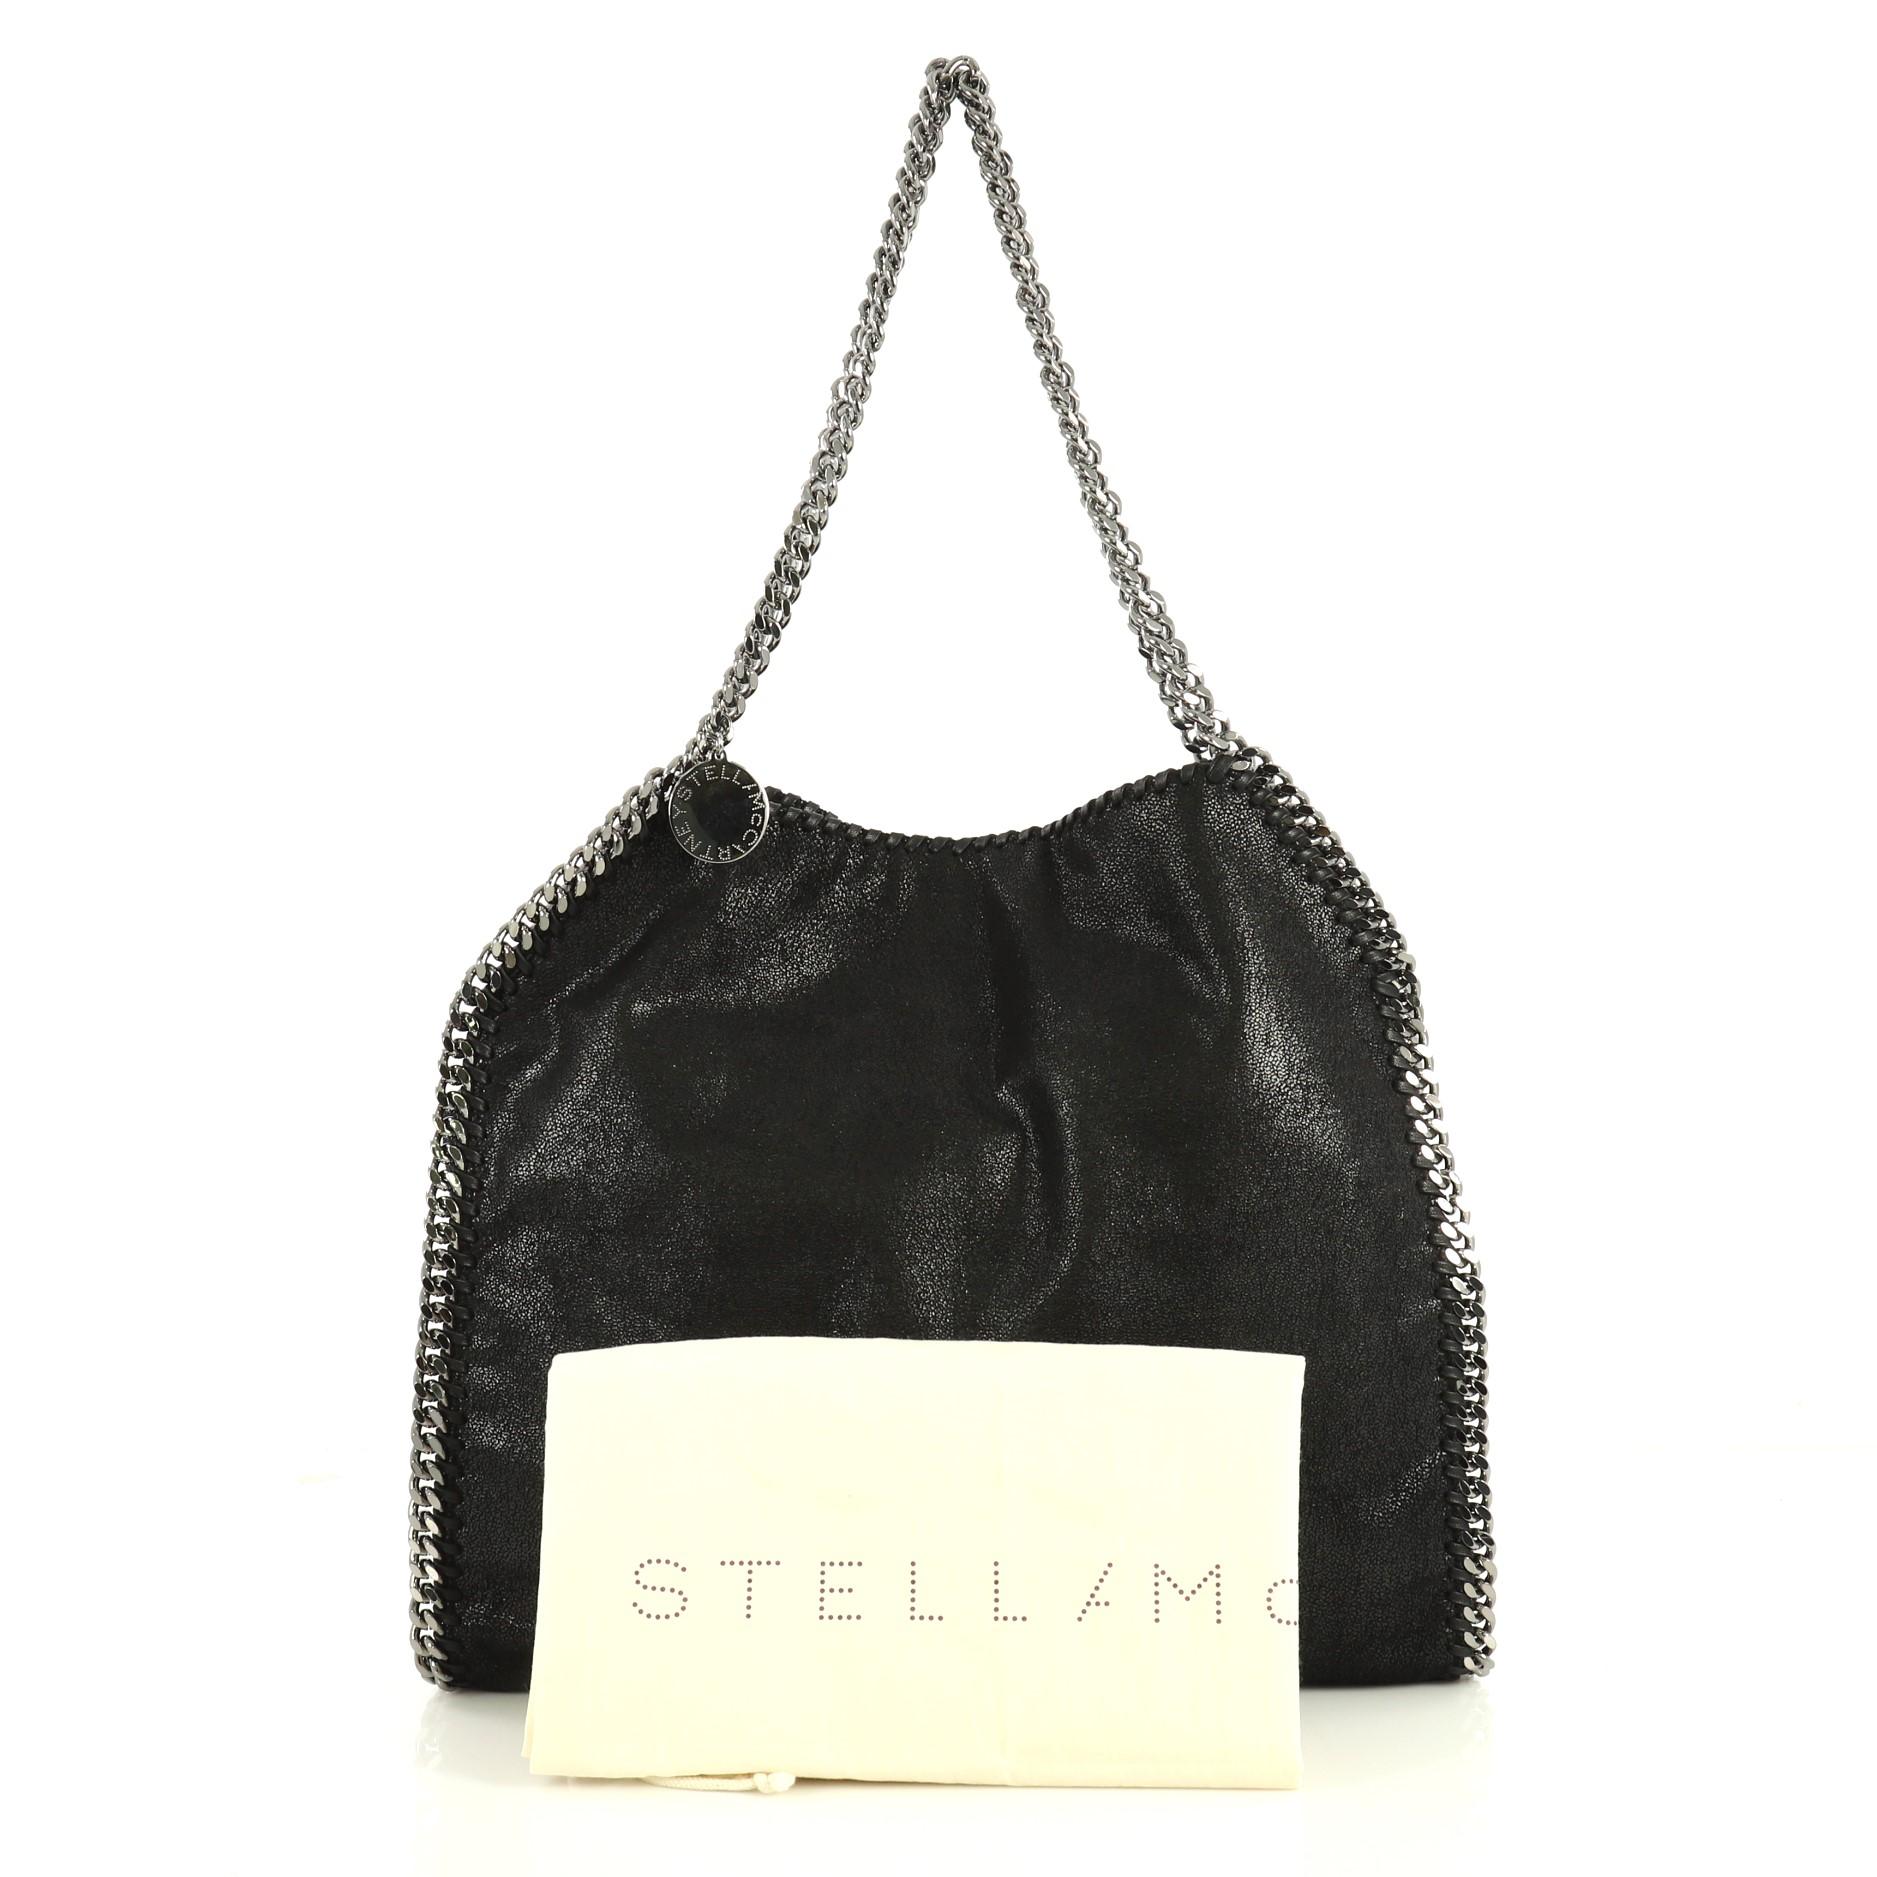 This Stella McCartney Falabella Tote Shaggy Deer Small, crafted from black shaggy deer, features chain link handles and trim, whipstitched edges, hanging logo disc, and gunmetal-tone hardware. Its magnetic snap closure opens to a pink fabric